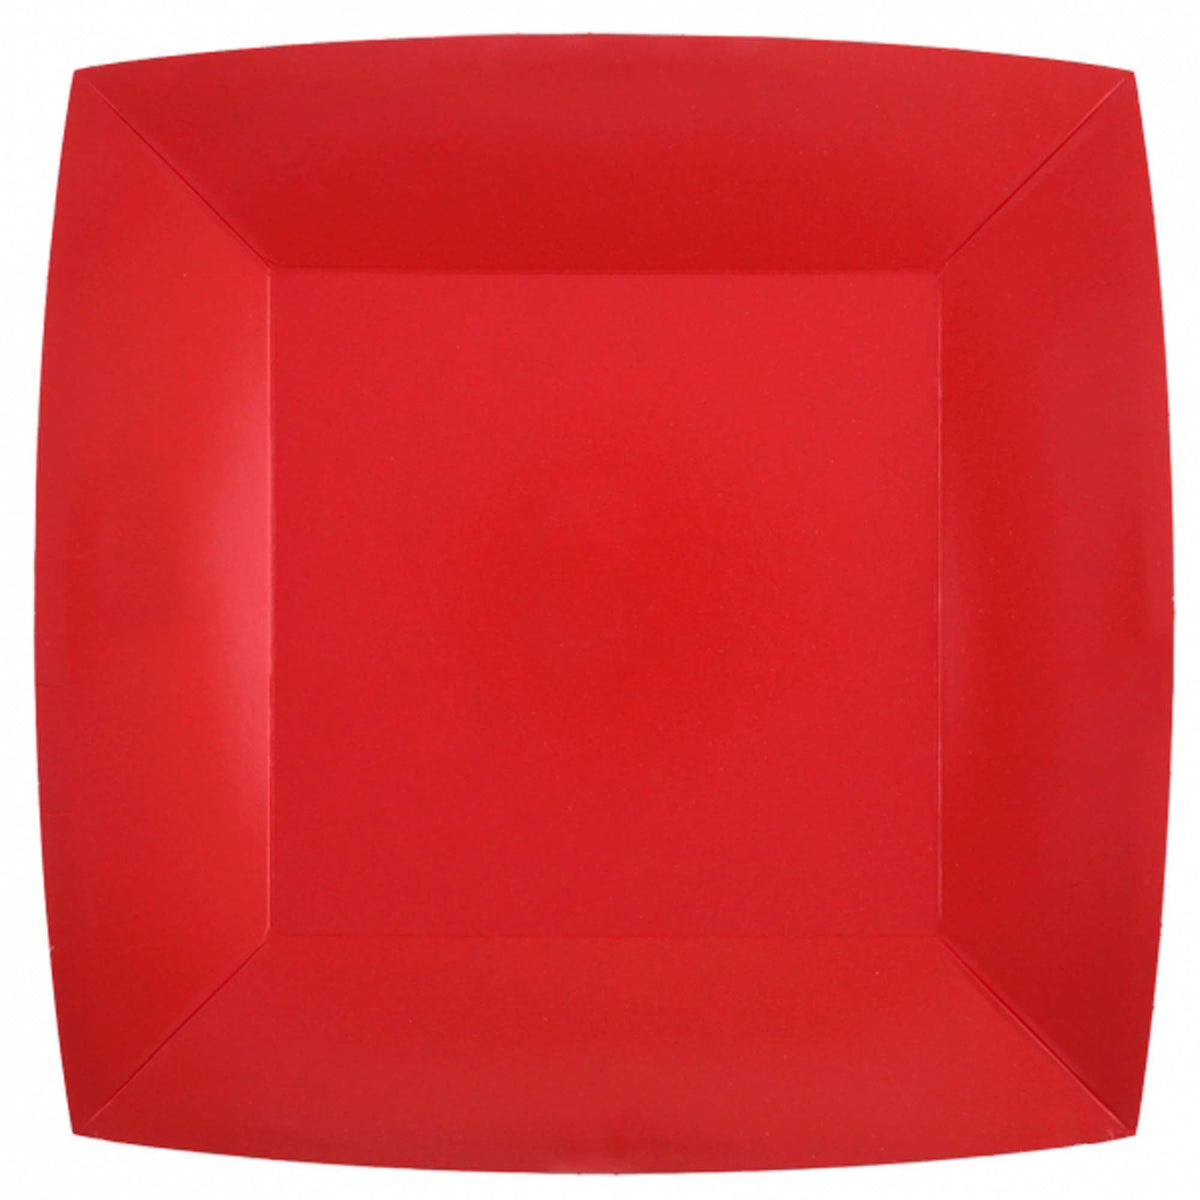 SANTEX Everyday Entertaining Red Large Square Lunch Party Paper Plates, 9 Inches, 10 Count 3660380072140